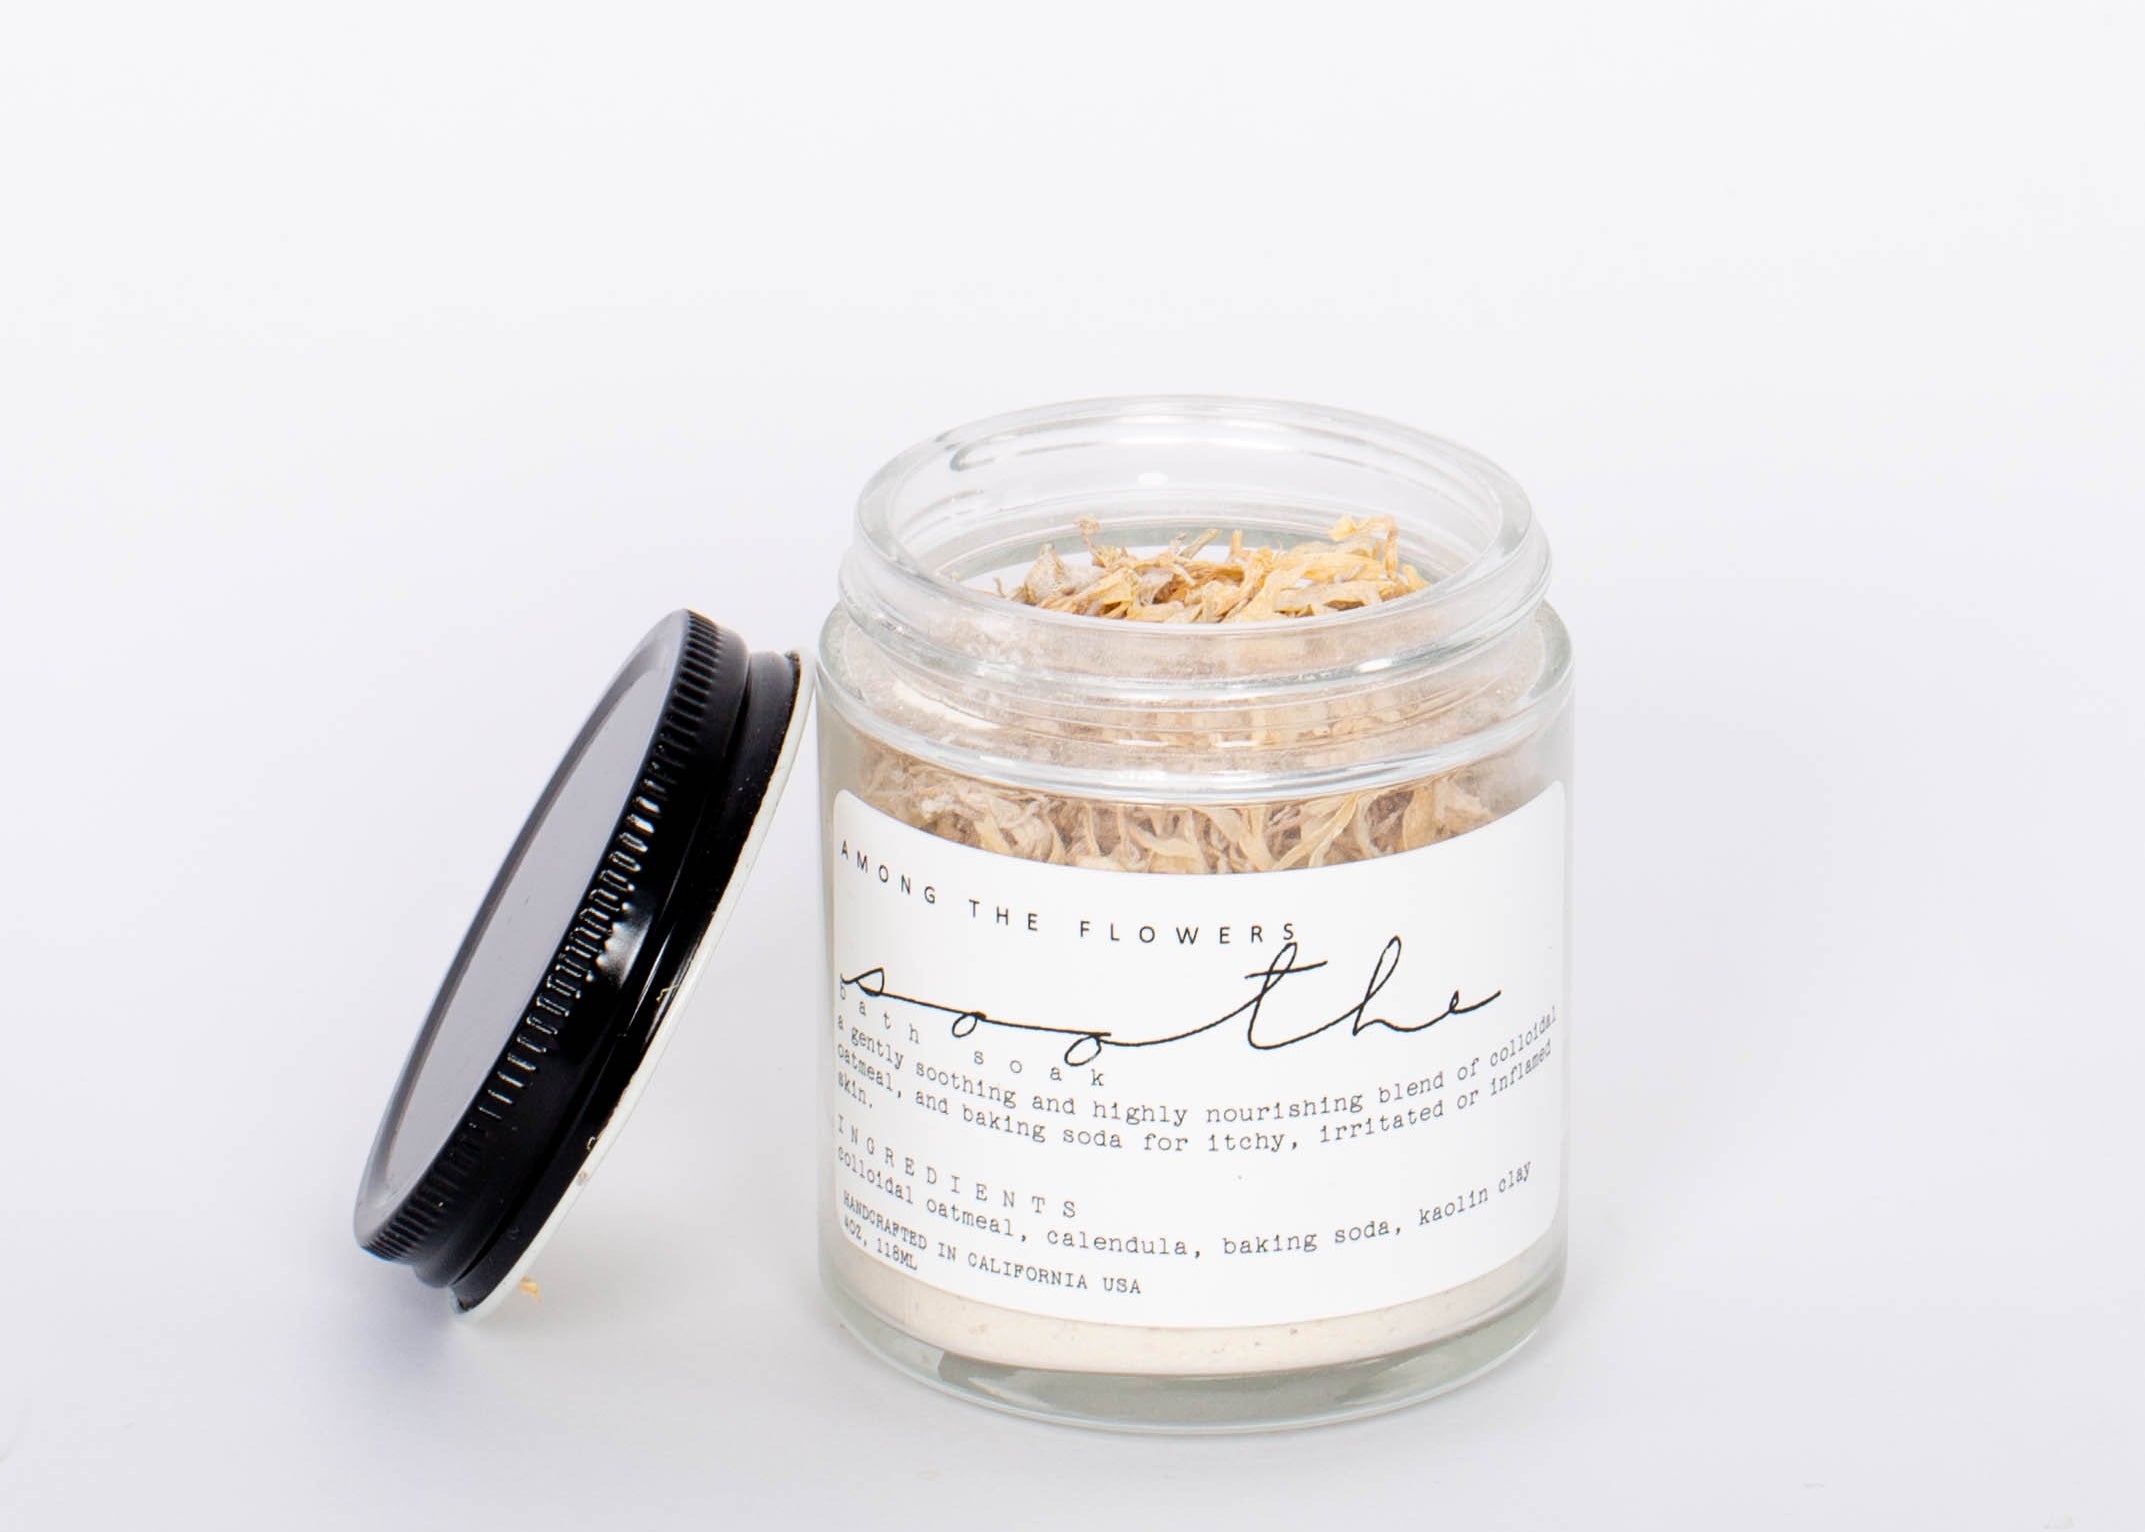 Among the Flowers Soothe Bath Soak. S O O T H E A blend of colloidal oats, coconut milk, and chamomile petals that effectively soothes inflammation and irritation related to minor scrapes and scratches, as well as rashes or bug bites. This is particularly helpful for dry skin, or issues with diaper rash.